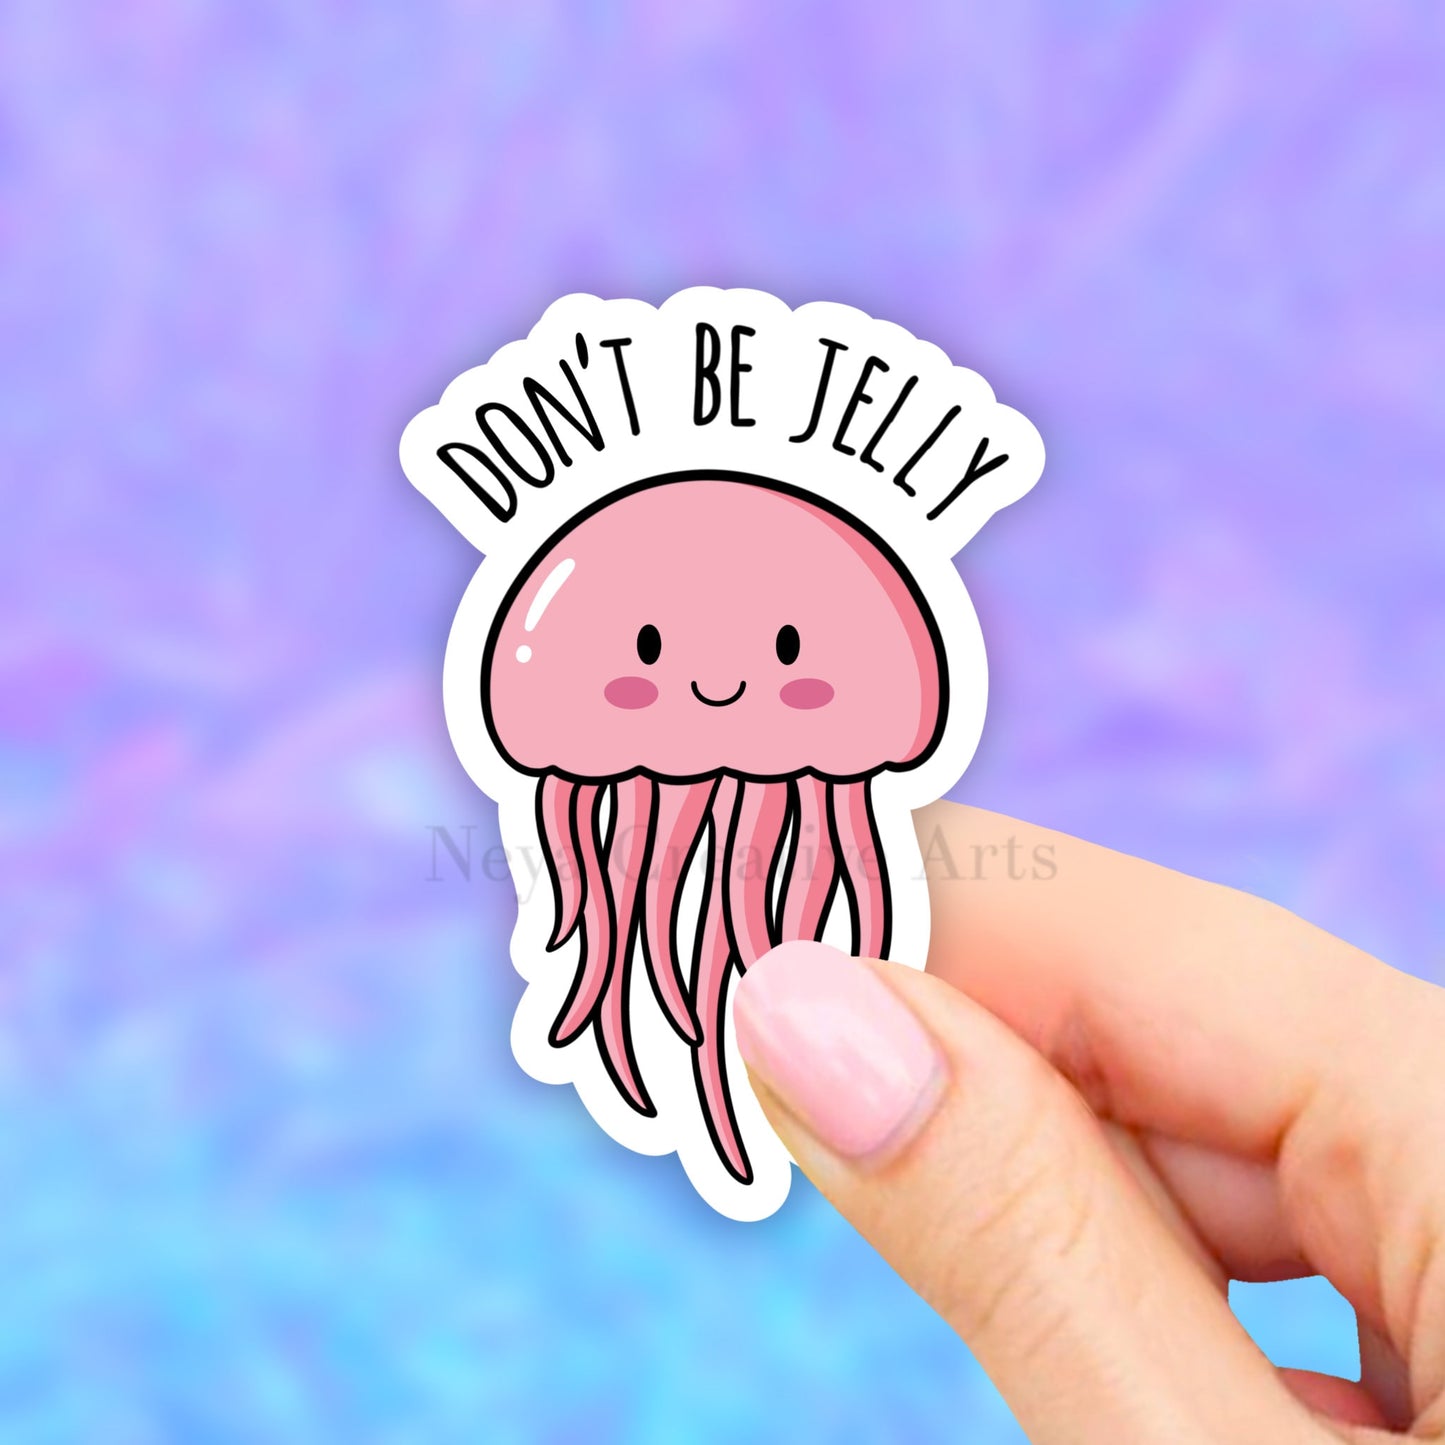 Don't Be Jelly Sticker, Jelly Fish Sticker, Laptop Decal, Vinyl Aesthetic Stickers, Water bottle Stickers, Computer Stickers, Waterproof